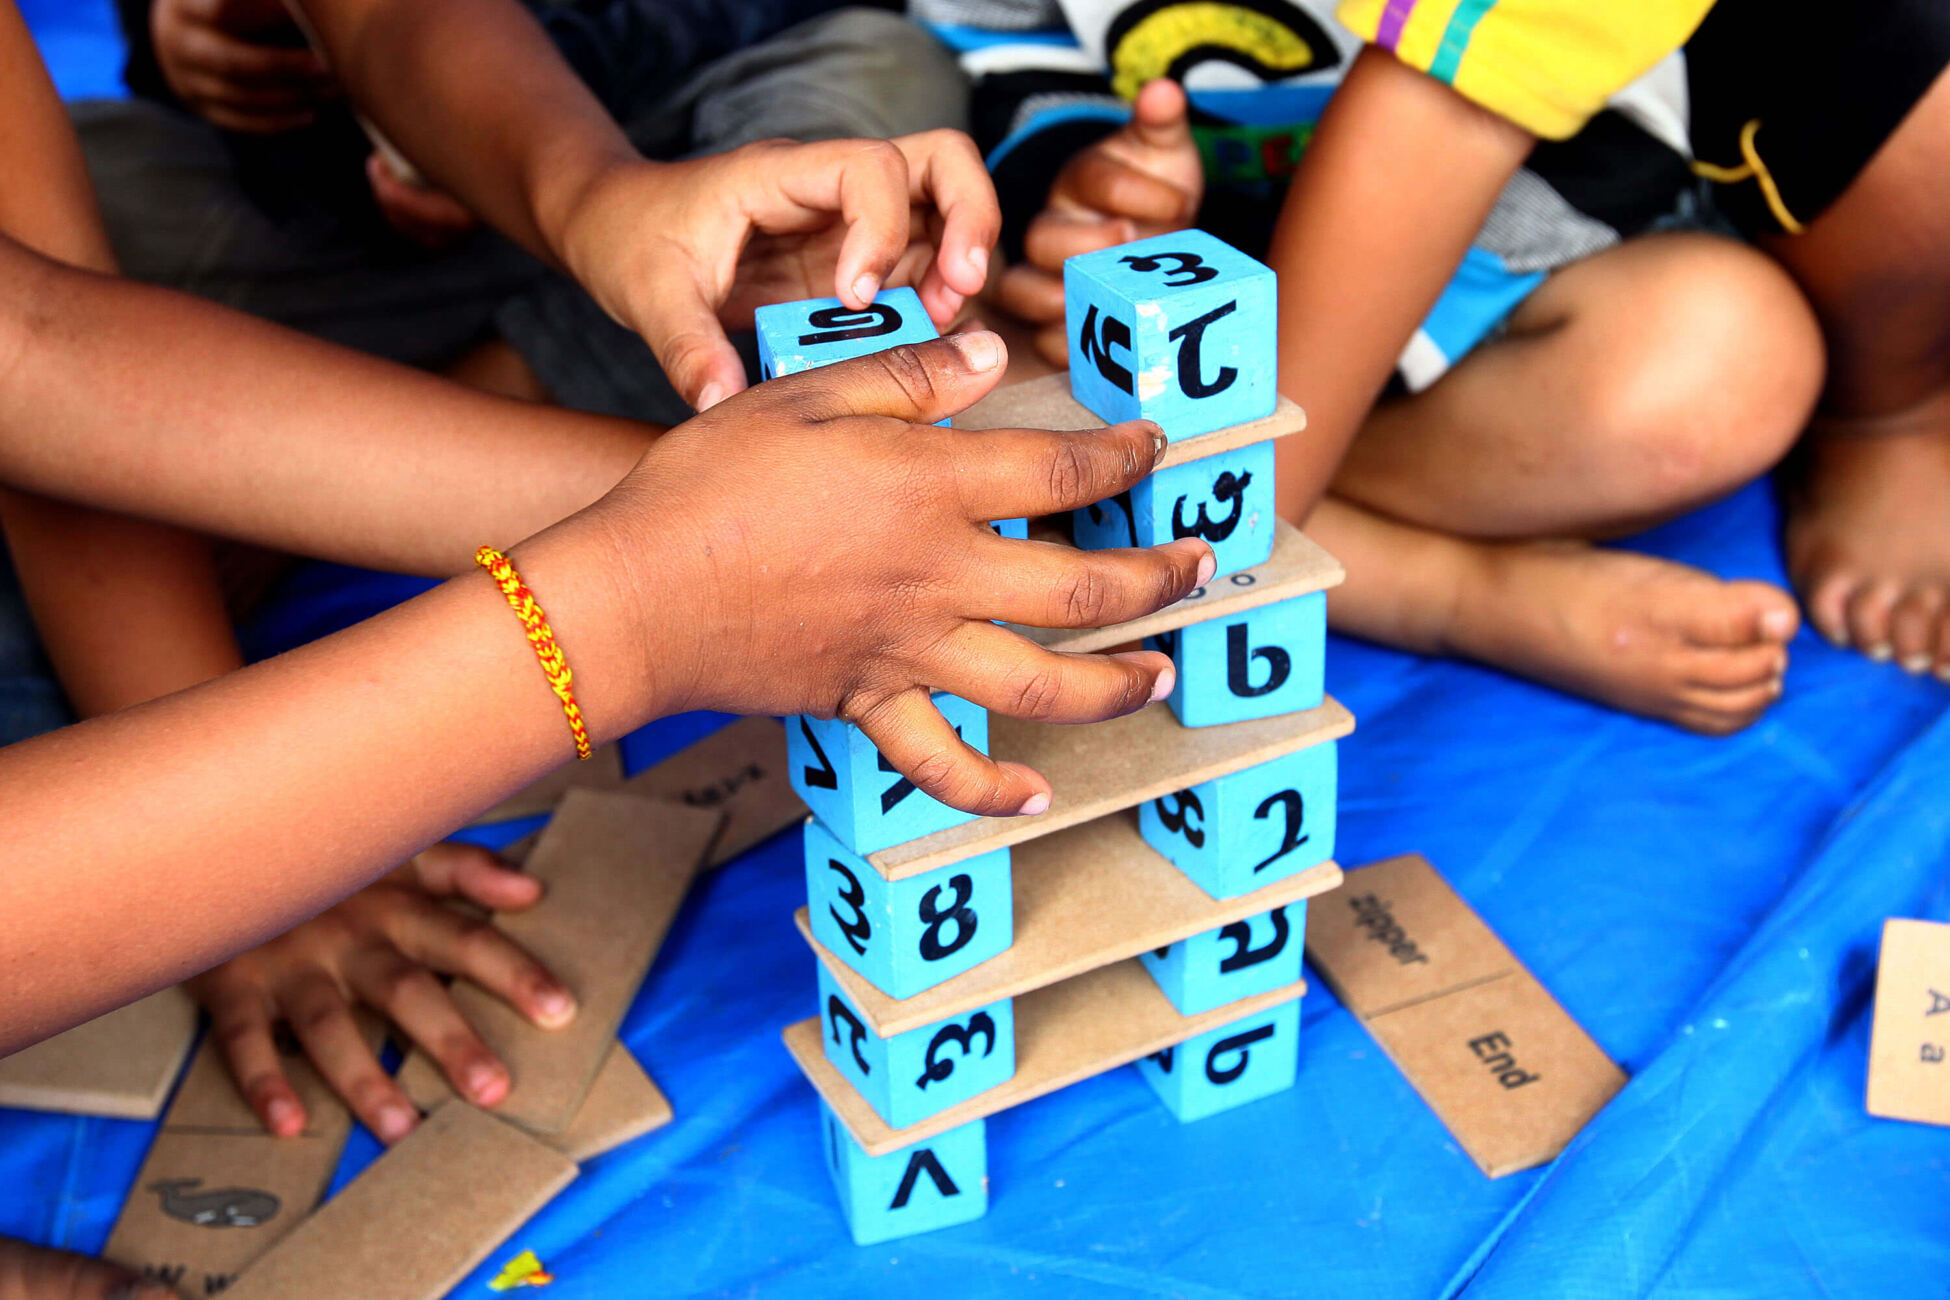 Group of children playing together with building blocks.